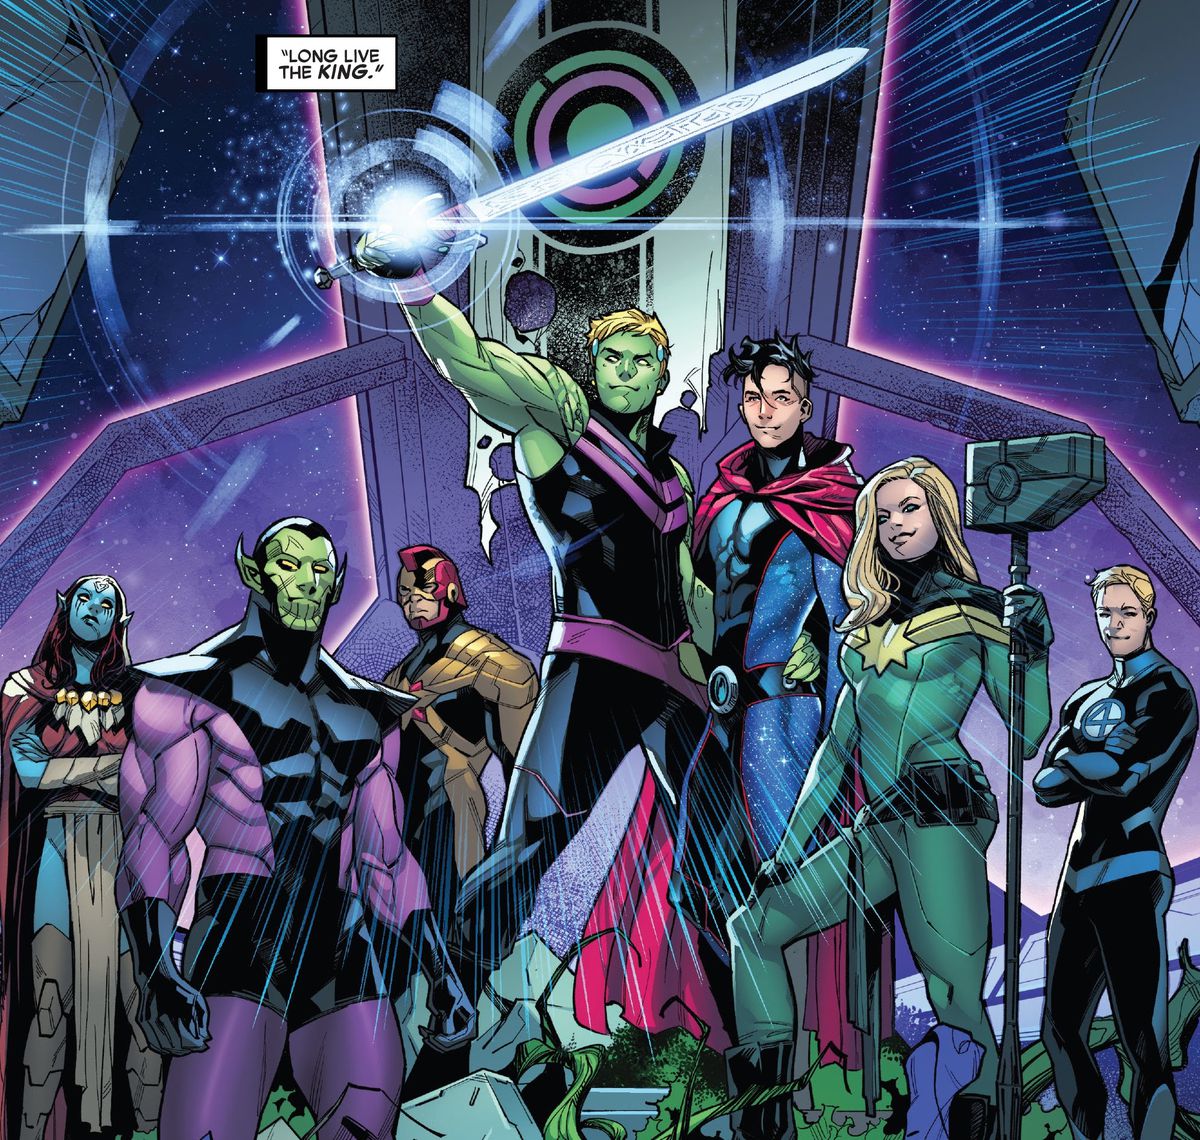 Teddy (Hulkling), emperor of the Kree/Skrull alliance, lifts his cosmic sword in triumph, flanked by his husband Billy (Wiccan) an Captain Marvel, the Human Torch, and more, in Empyre #6, Marvel Comics (2020).